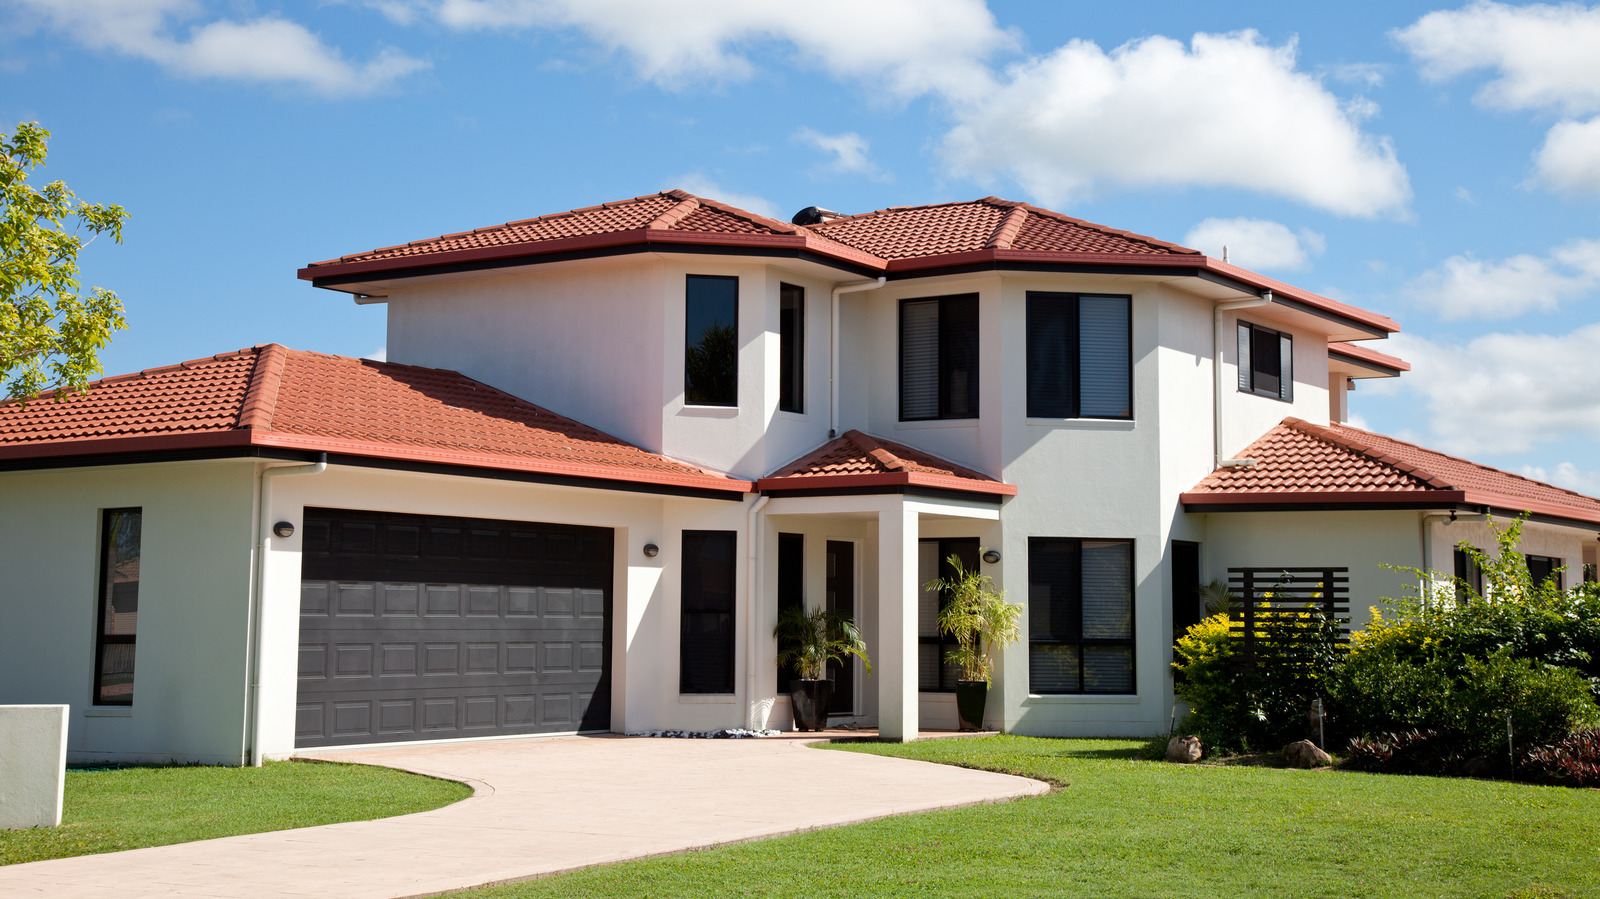 What Is A Hip Roof And Is It The Right Roofing Style For Your Home?